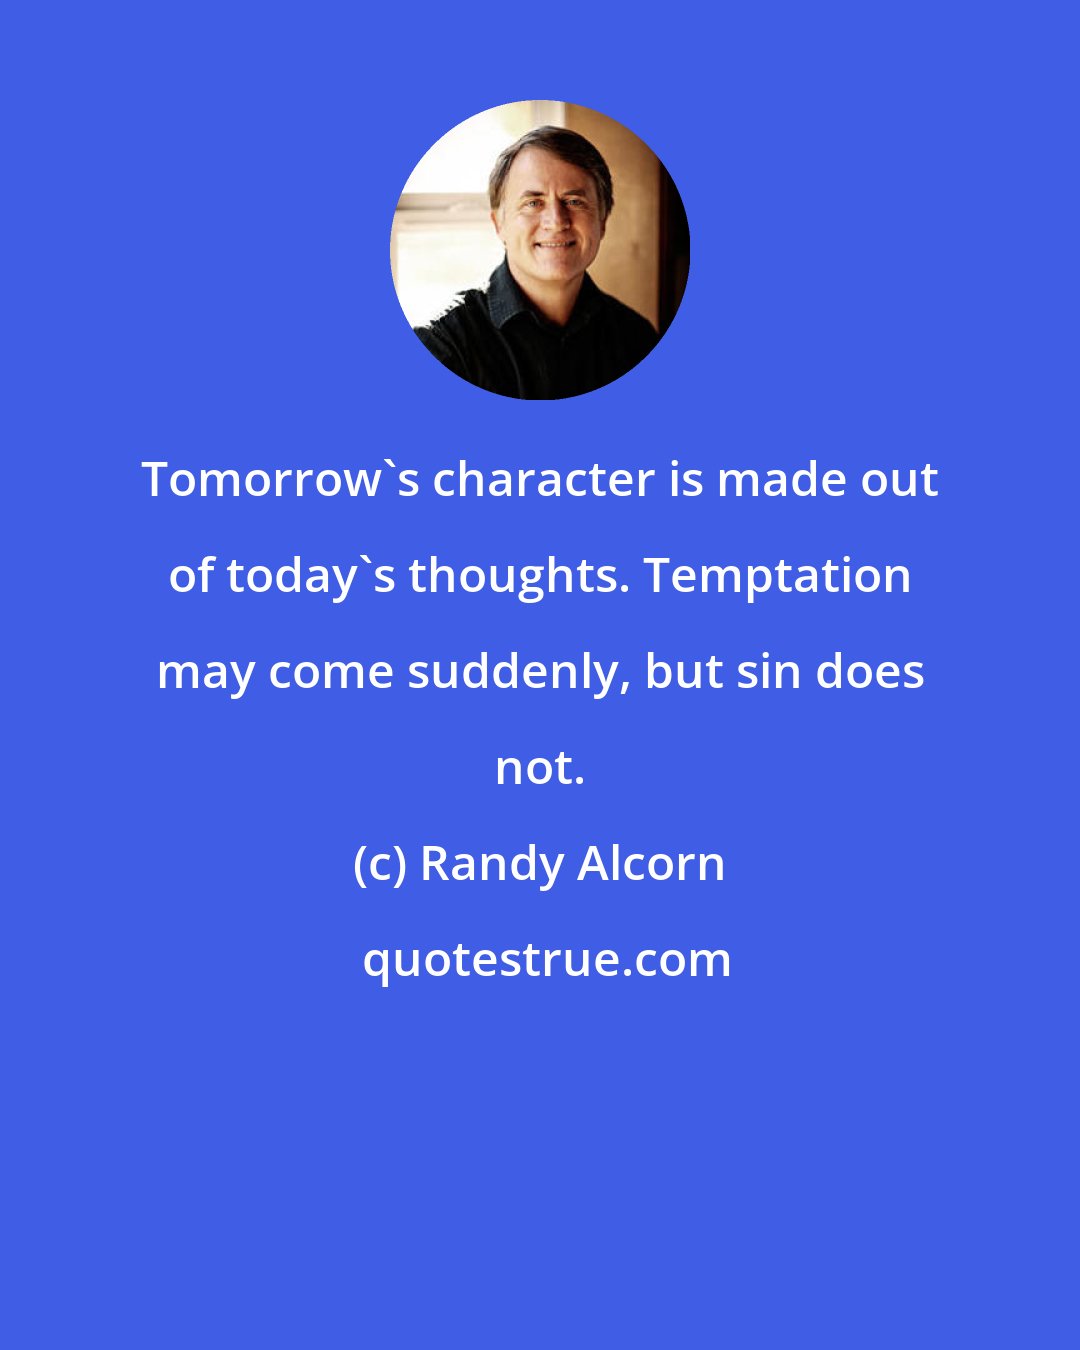 Randy Alcorn: Tomorrow's character is made out of today's thoughts. Temptation may come suddenly, but sin does not.